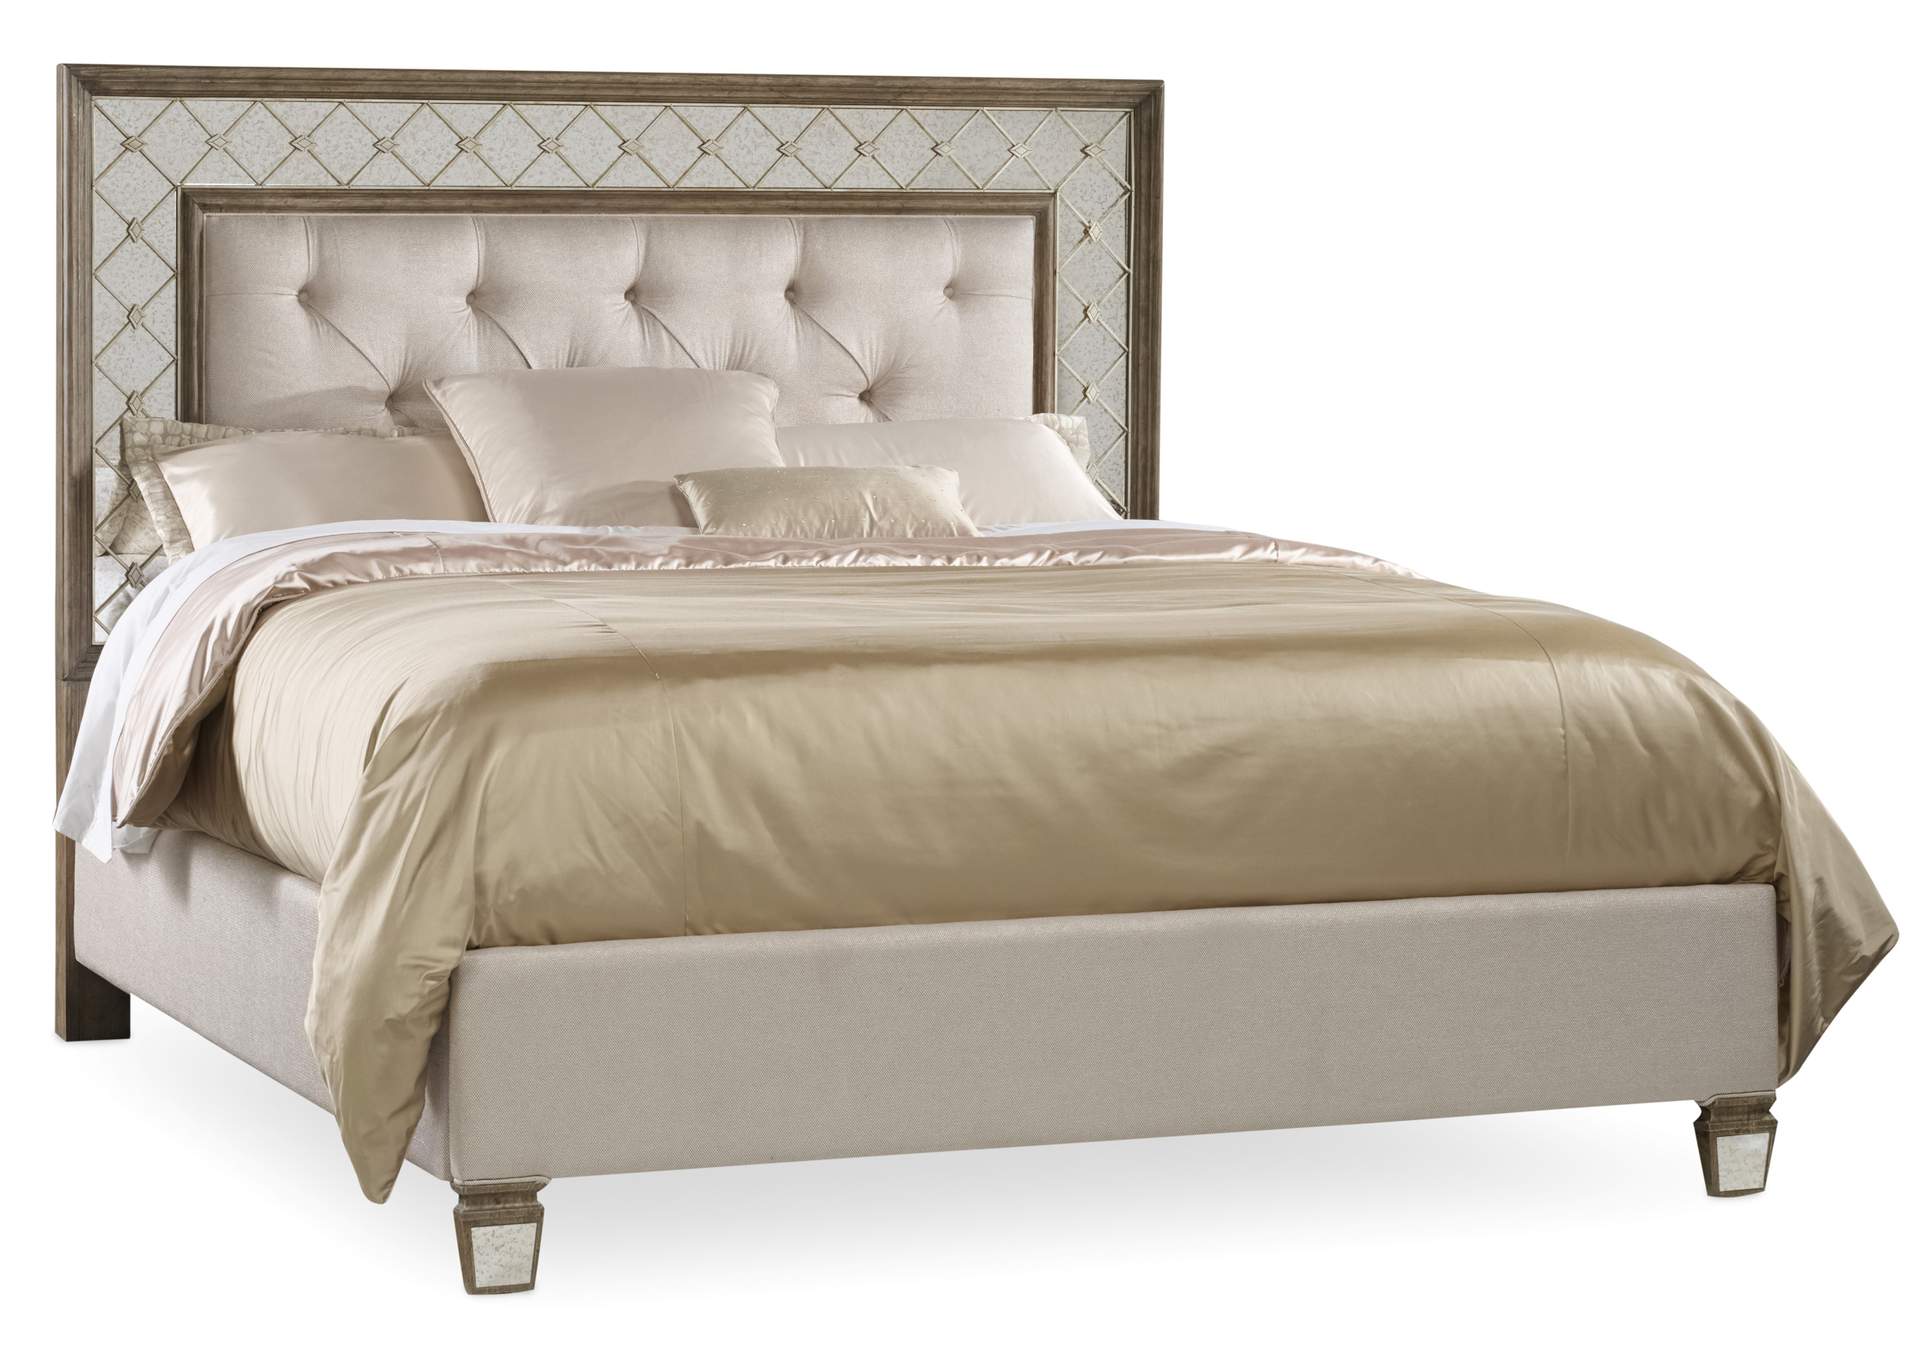 Sanctuary King Mirrored Upholstered Bed